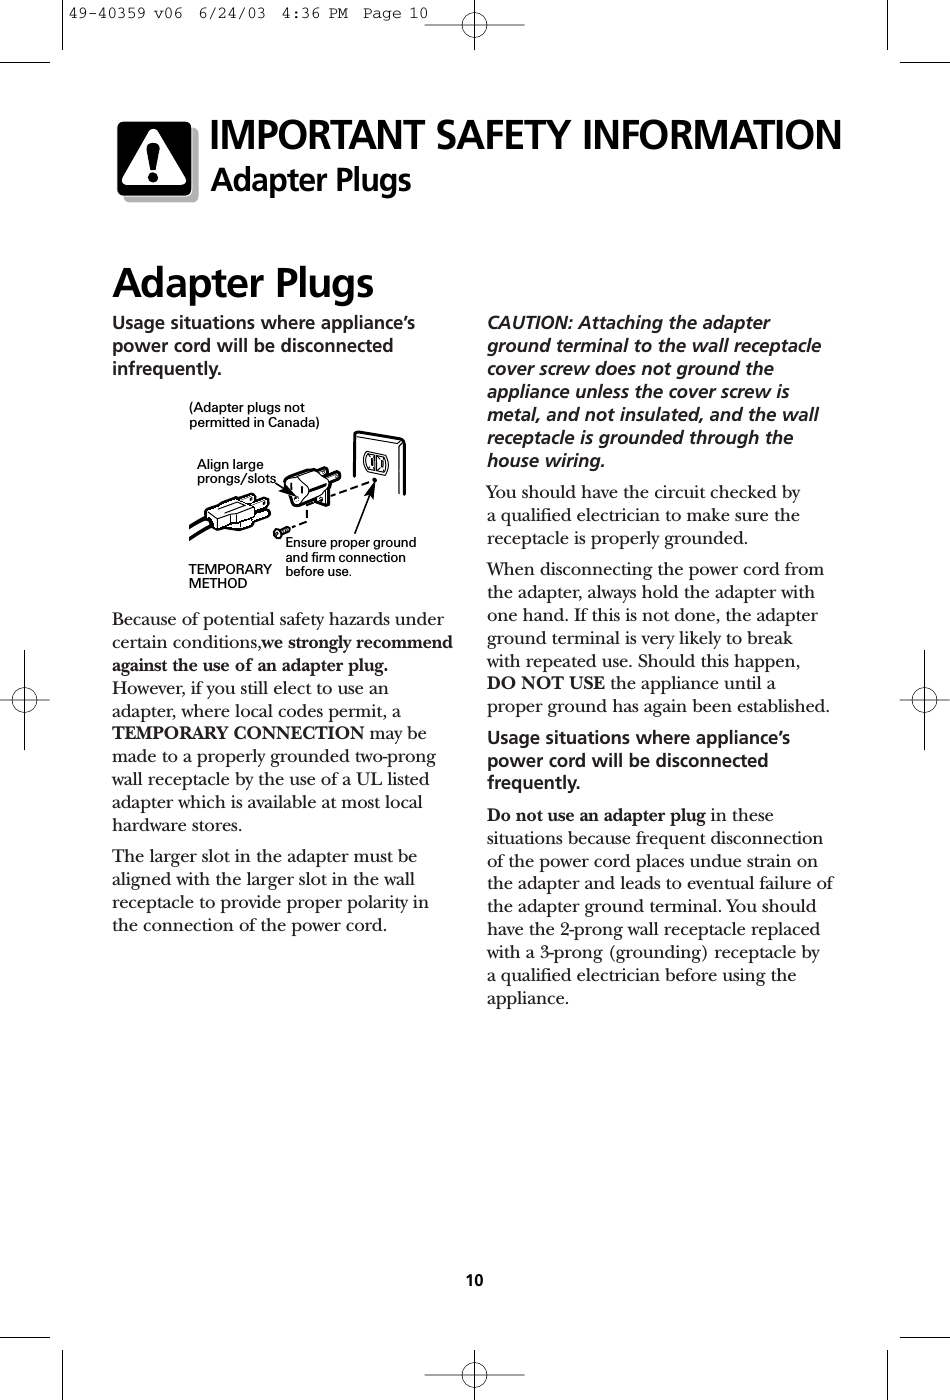 Usage situations where appliance’spower cord will be disconnectedinfrequently.Because of potential safety hazards undercertain conditions,we strongly recommendagainst the use of an adapter plug.However, if you still elect to use an adapter, where local codes permit, aTEMPORARY CONNECTION may bemade to a properly grounded two-prongwall receptacle by the use of a UL listedadapter which is available at most localhardware stores.The larger slot in the adapter must bealigned with the larger slot in the wallreceptacle to provide proper polarity in the connection of the power cord.CAUTION: Attaching the adapterground terminal to the wall receptaclecover screw does not ground theappliance unless the cover screw ismetal, and not insulated, and the wallreceptacle is grounded through thehouse wiring. You should have the circuit checked by a qualified electrician to make sure thereceptacle is properly grounded.When disconnecting the power cord fromthe adapter, always hold the adapter withone hand. If this is not done, the adapterground terminal is very likely to break with repeated use. Should this happen, DO NOT USE the appliance until a proper ground has again been established.Usage situations where appliance’spower cord will be disconnectedfrequently.Do not use an adapter plug in thesesituations because frequent disconnectionof the power cord places undue strain onthe adapter and leads to eventual failure ofthe adapter ground terminal. You shouldhave the 2-prong wall receptacle replacedwith a 3-prong (grounding) receptacle by a qualified electrician before using theappliance.Adapter Plugs10IMPORTANT SAFETY INFORMATIONAdapter PlugsEnsure proper groundand firm connectionbefore use.TEMPORARYMETHODAlign largeprongs/slots(Adapter plugs notpermitted in Canada)49-40359 v06  6/24/03  4:36 PM  Page 10